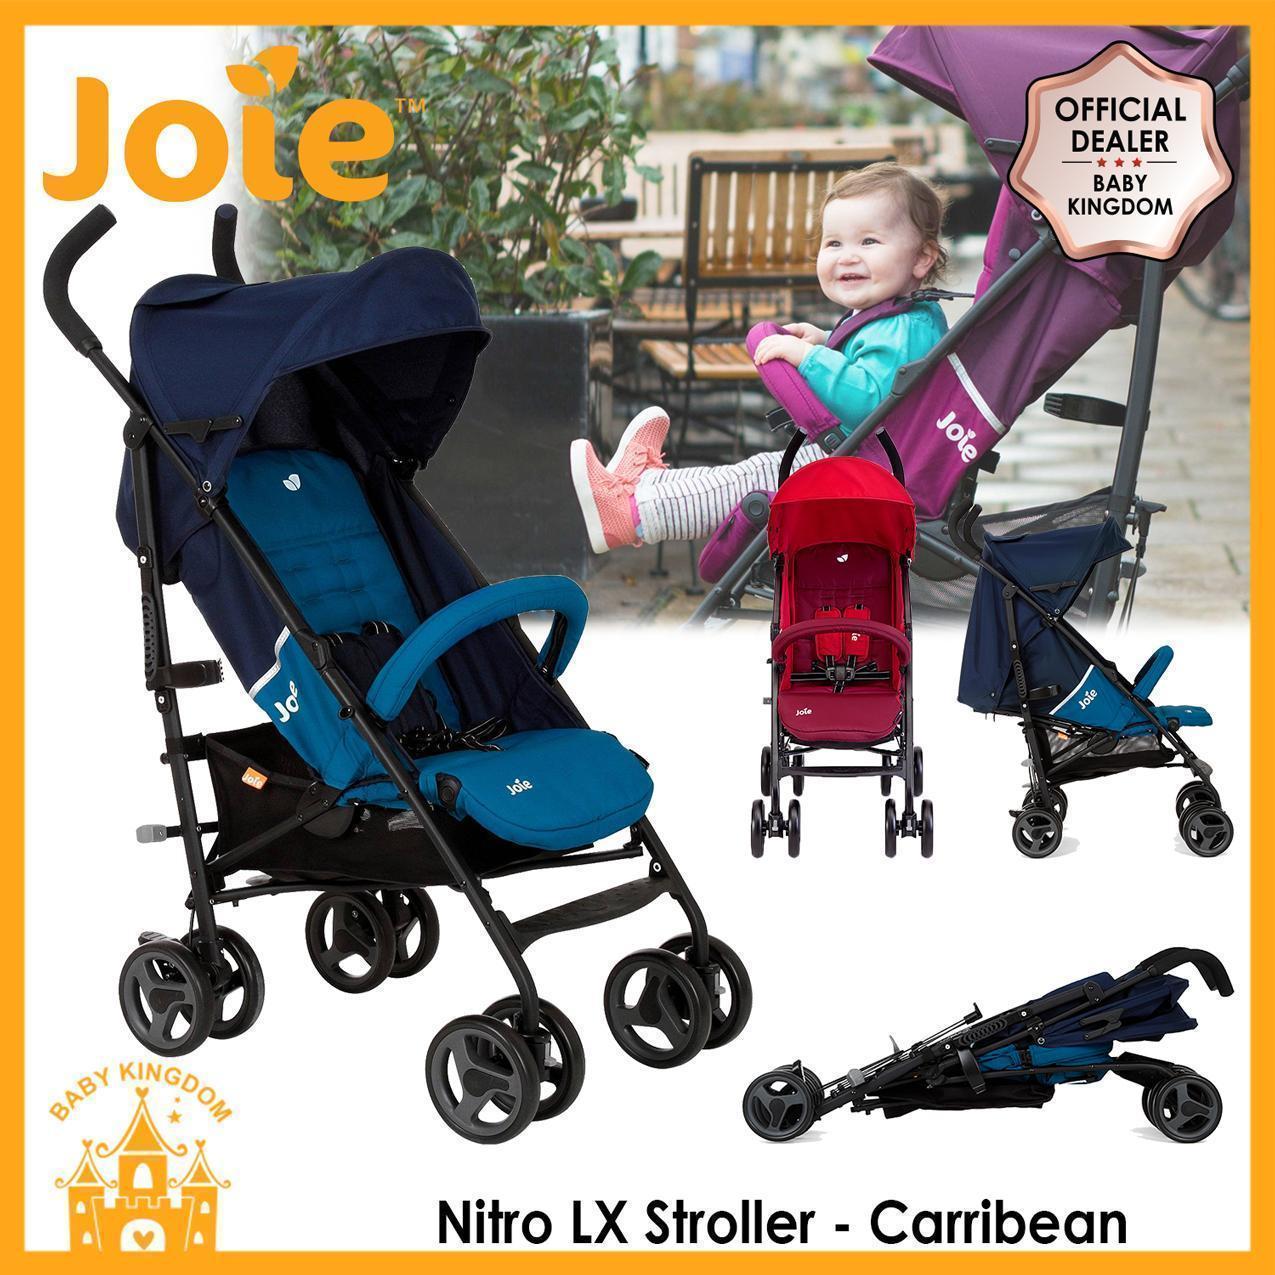 difference between joie nitro and nitro lx